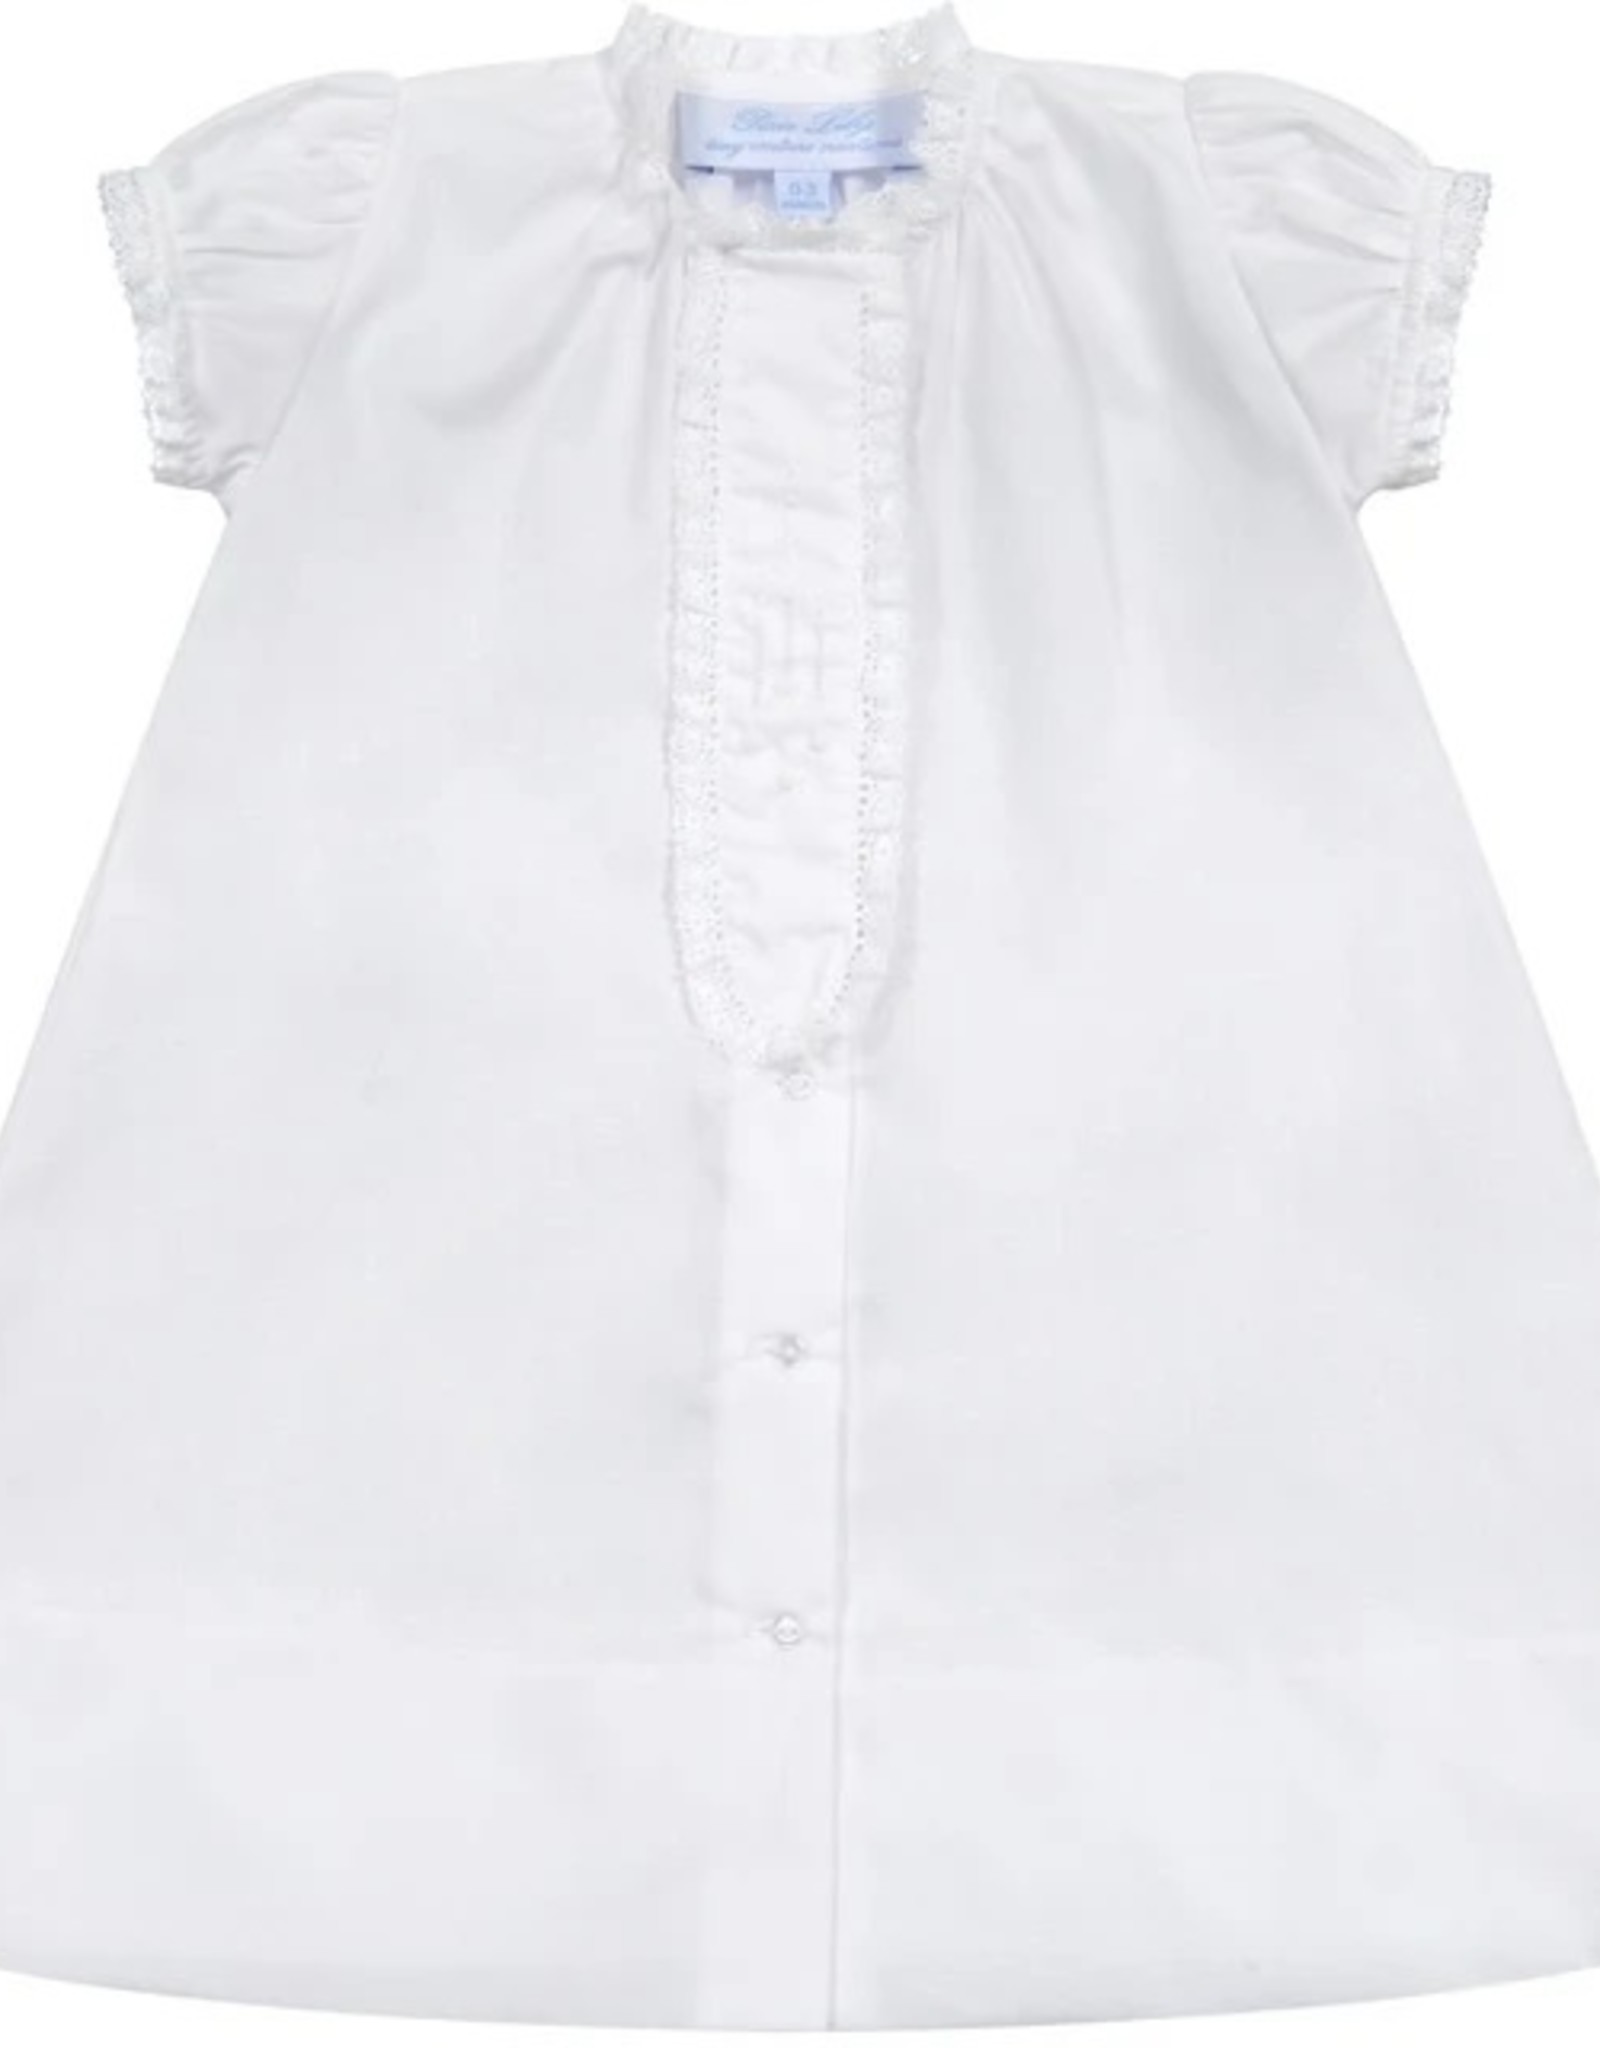 Pixie Lily White Lace Daygown